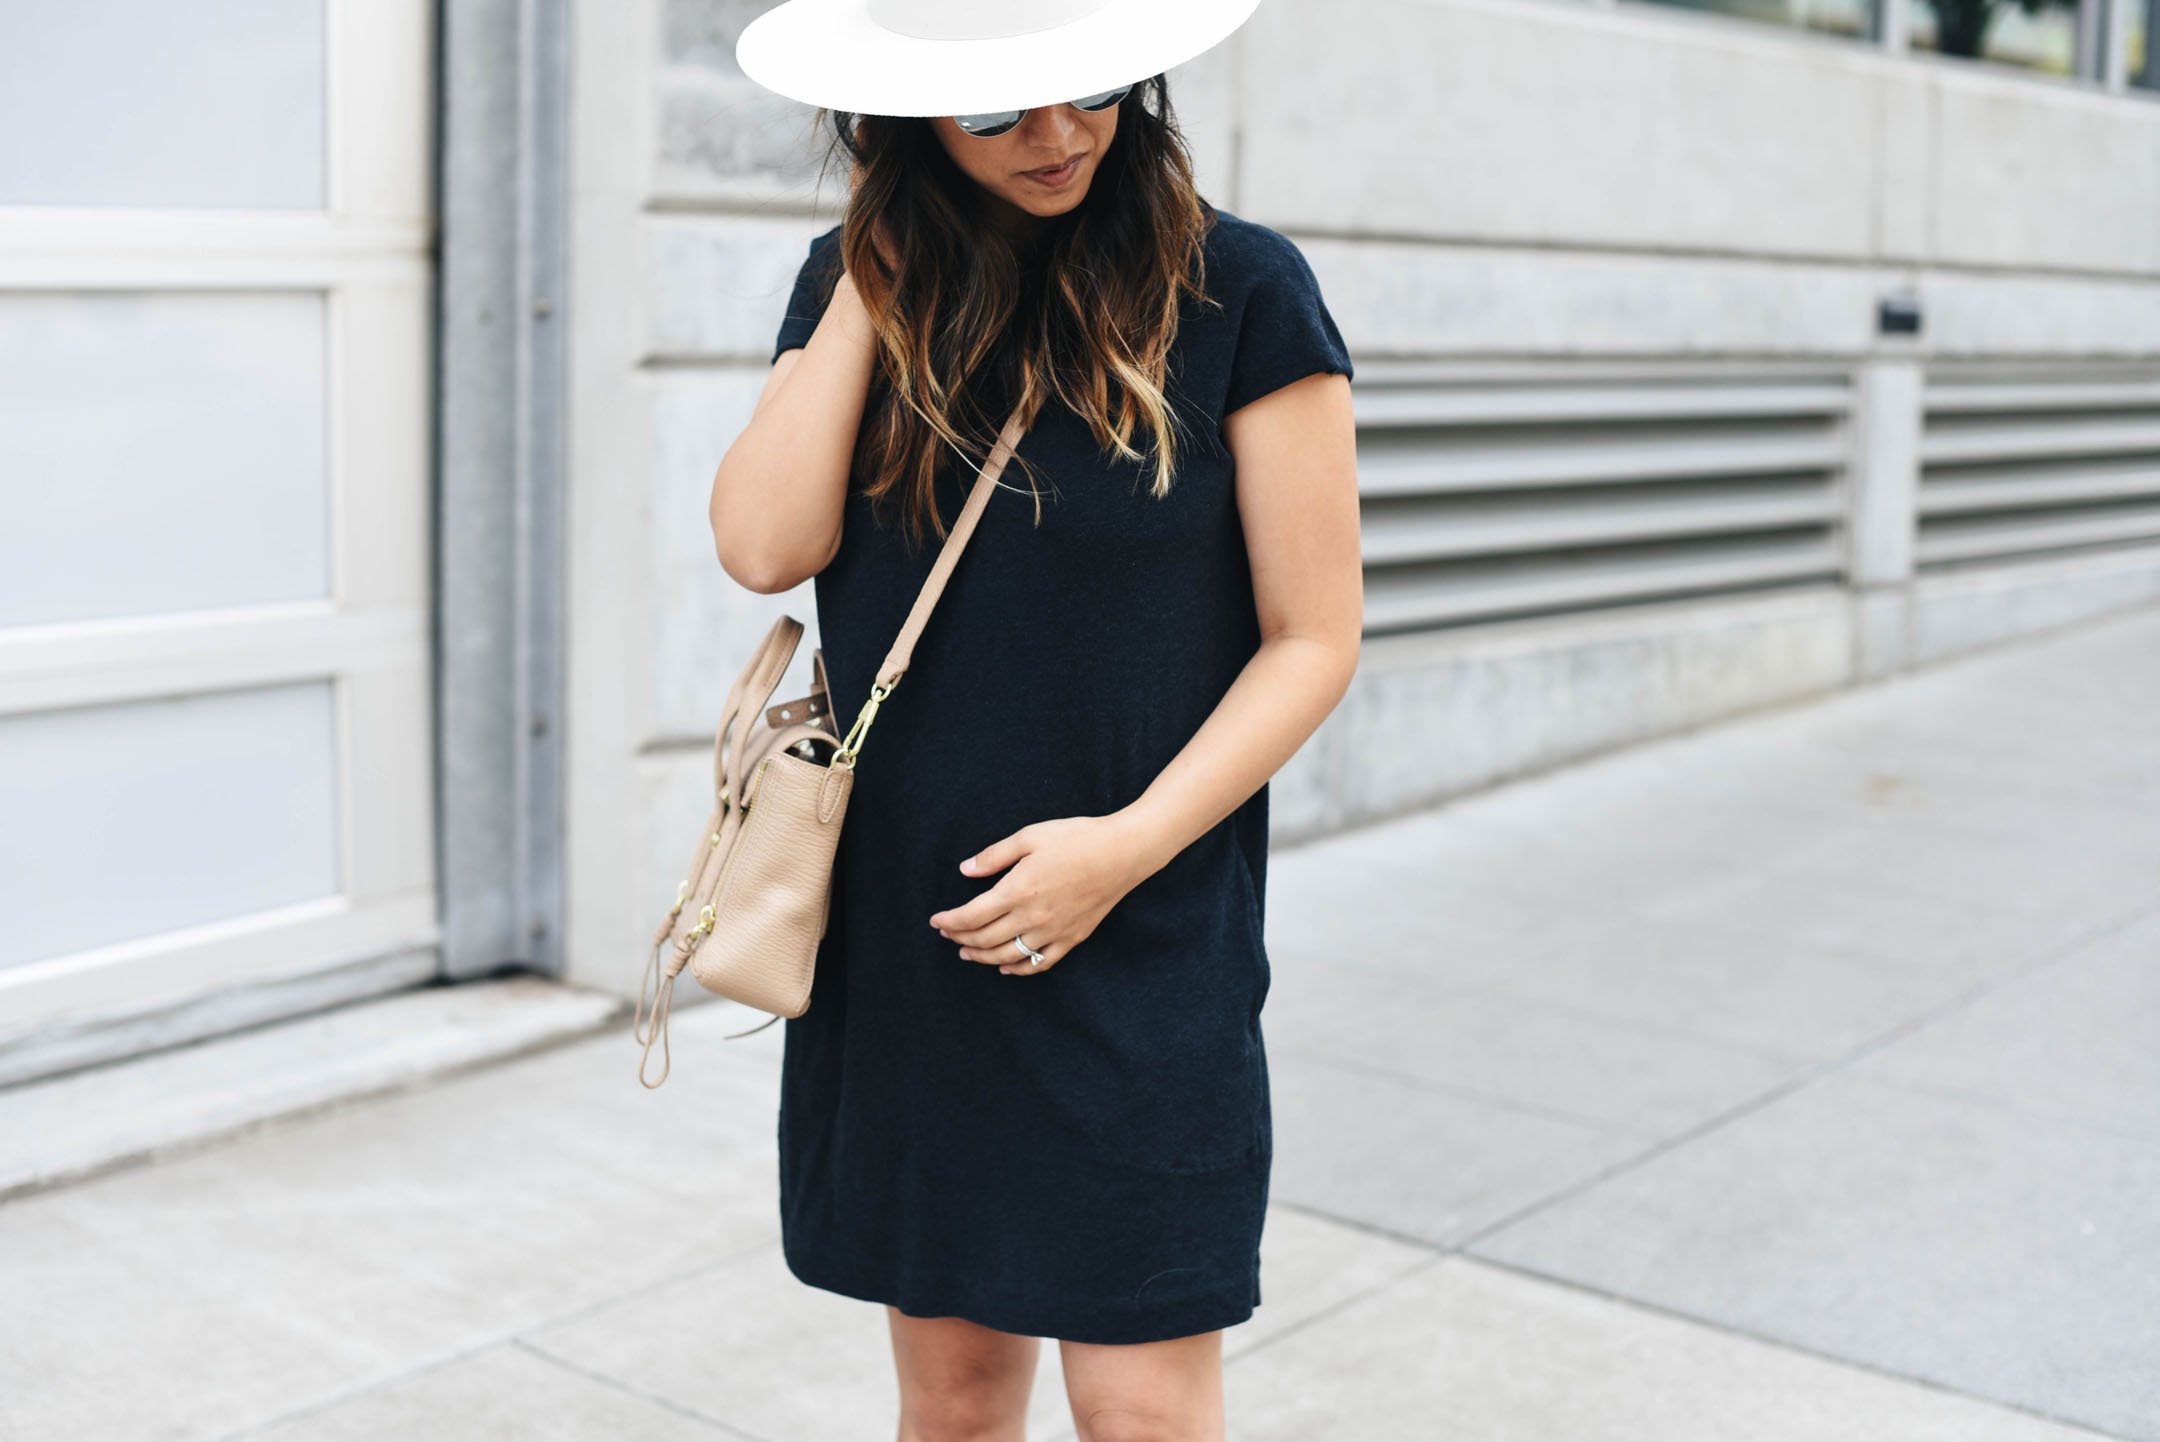 How to style your baby bump